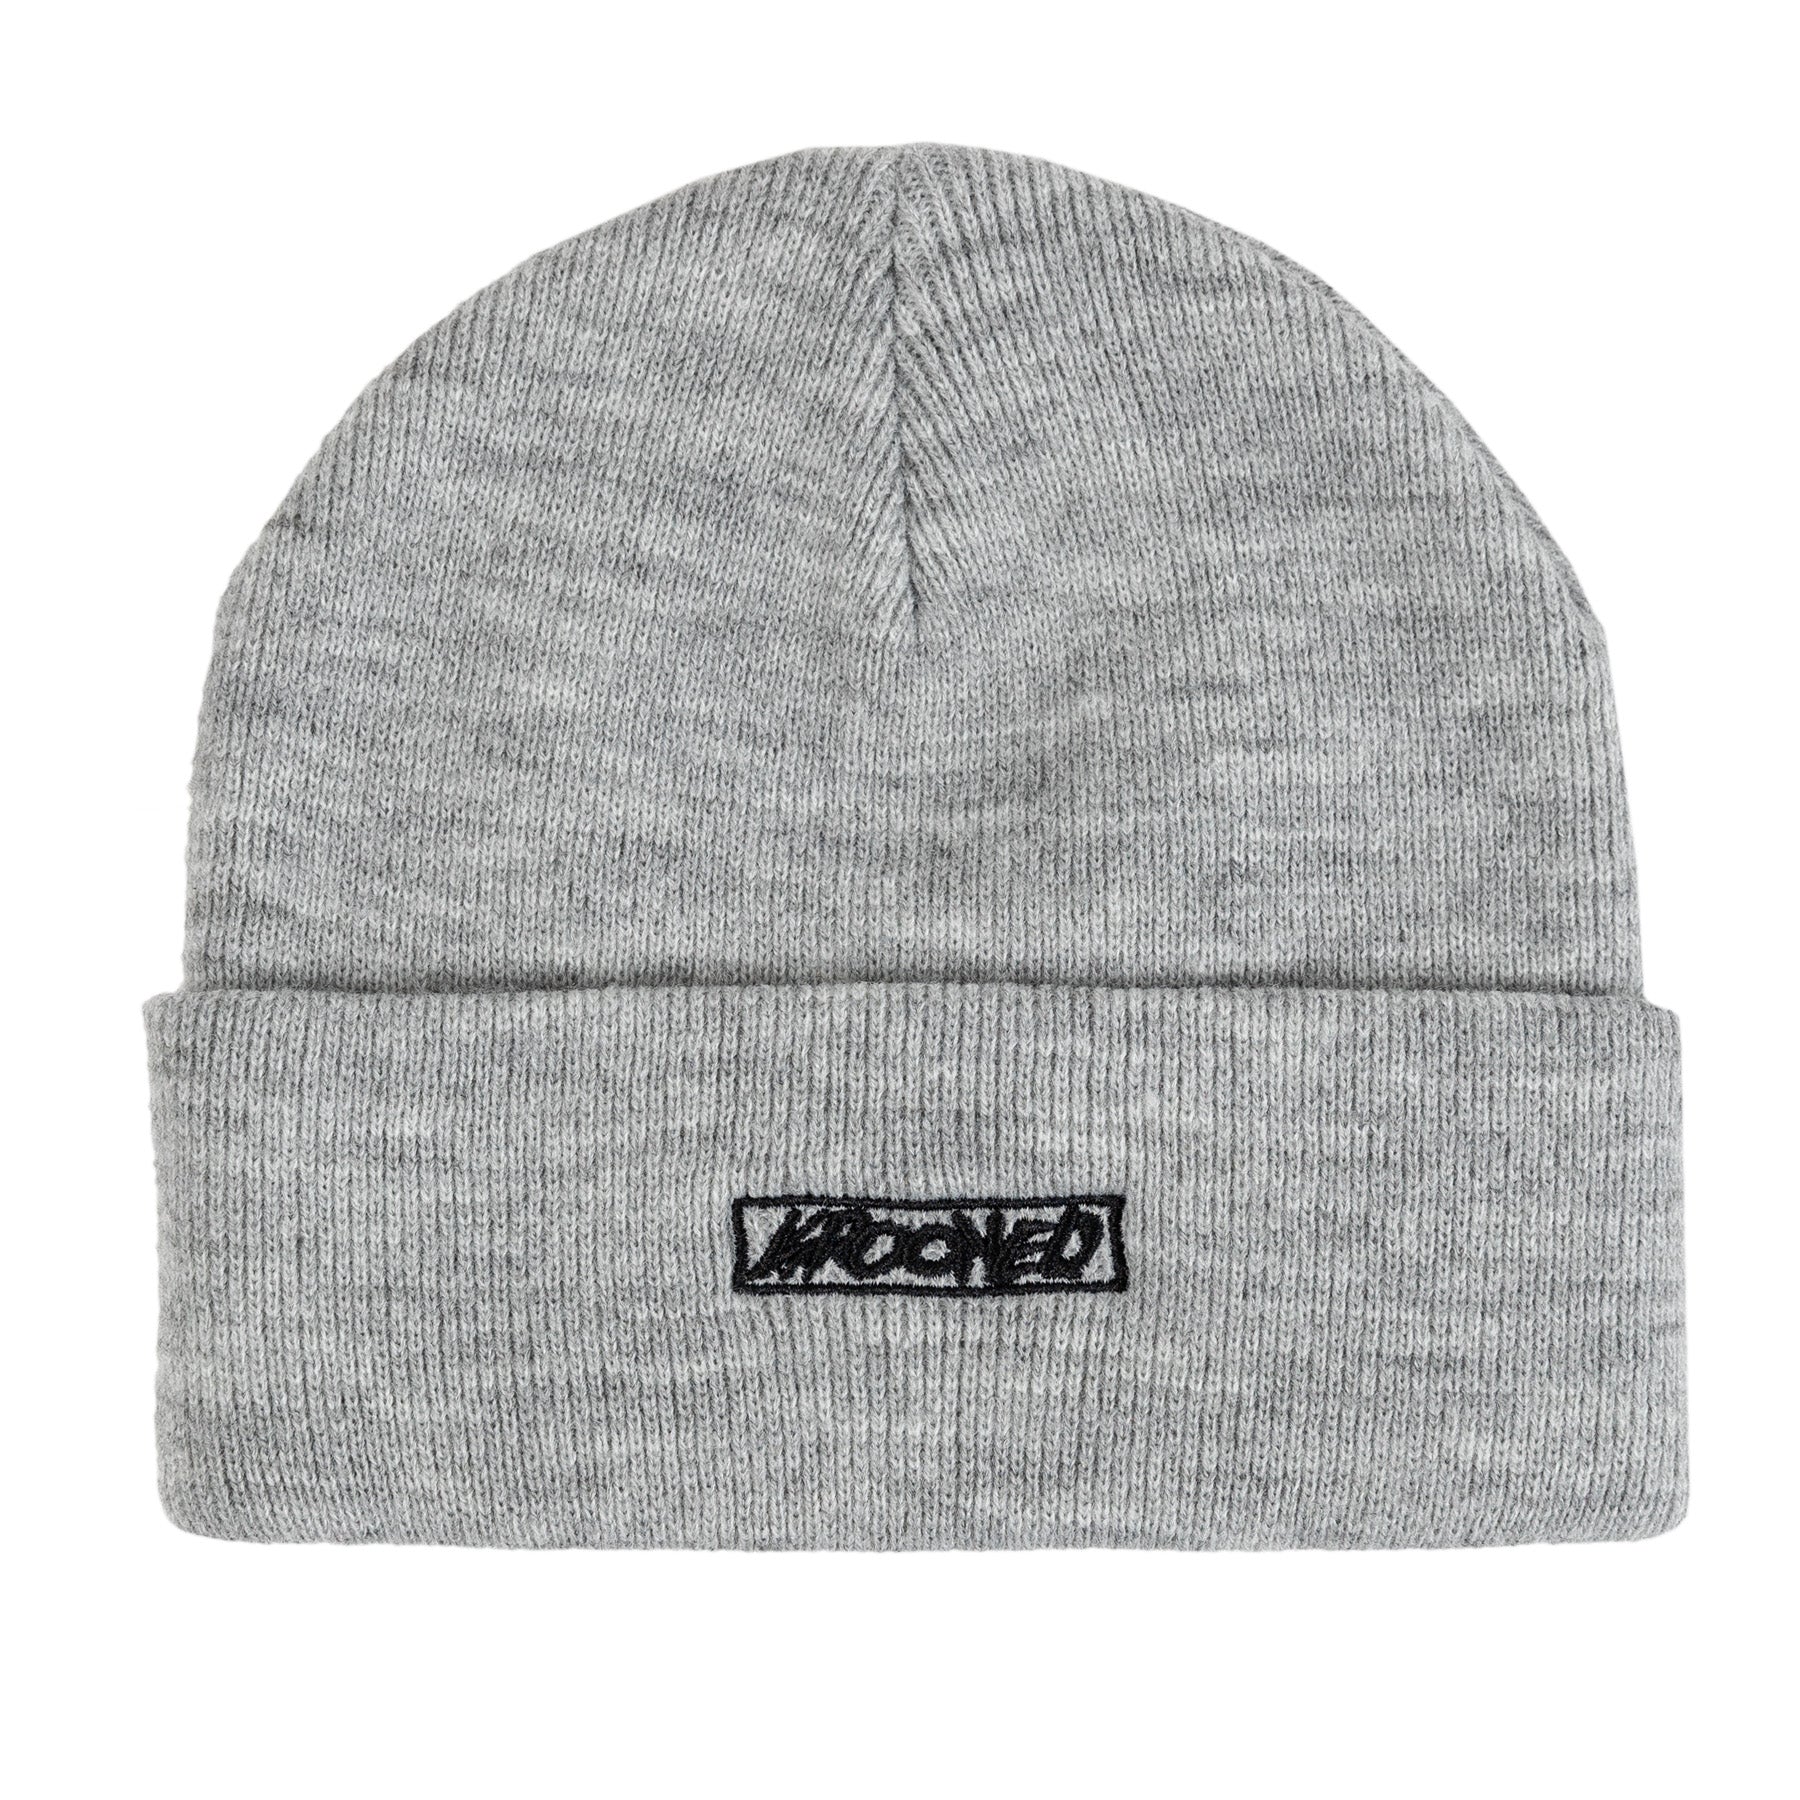 Krooked Moonsmile Script Cuff Beanie Heather Gray